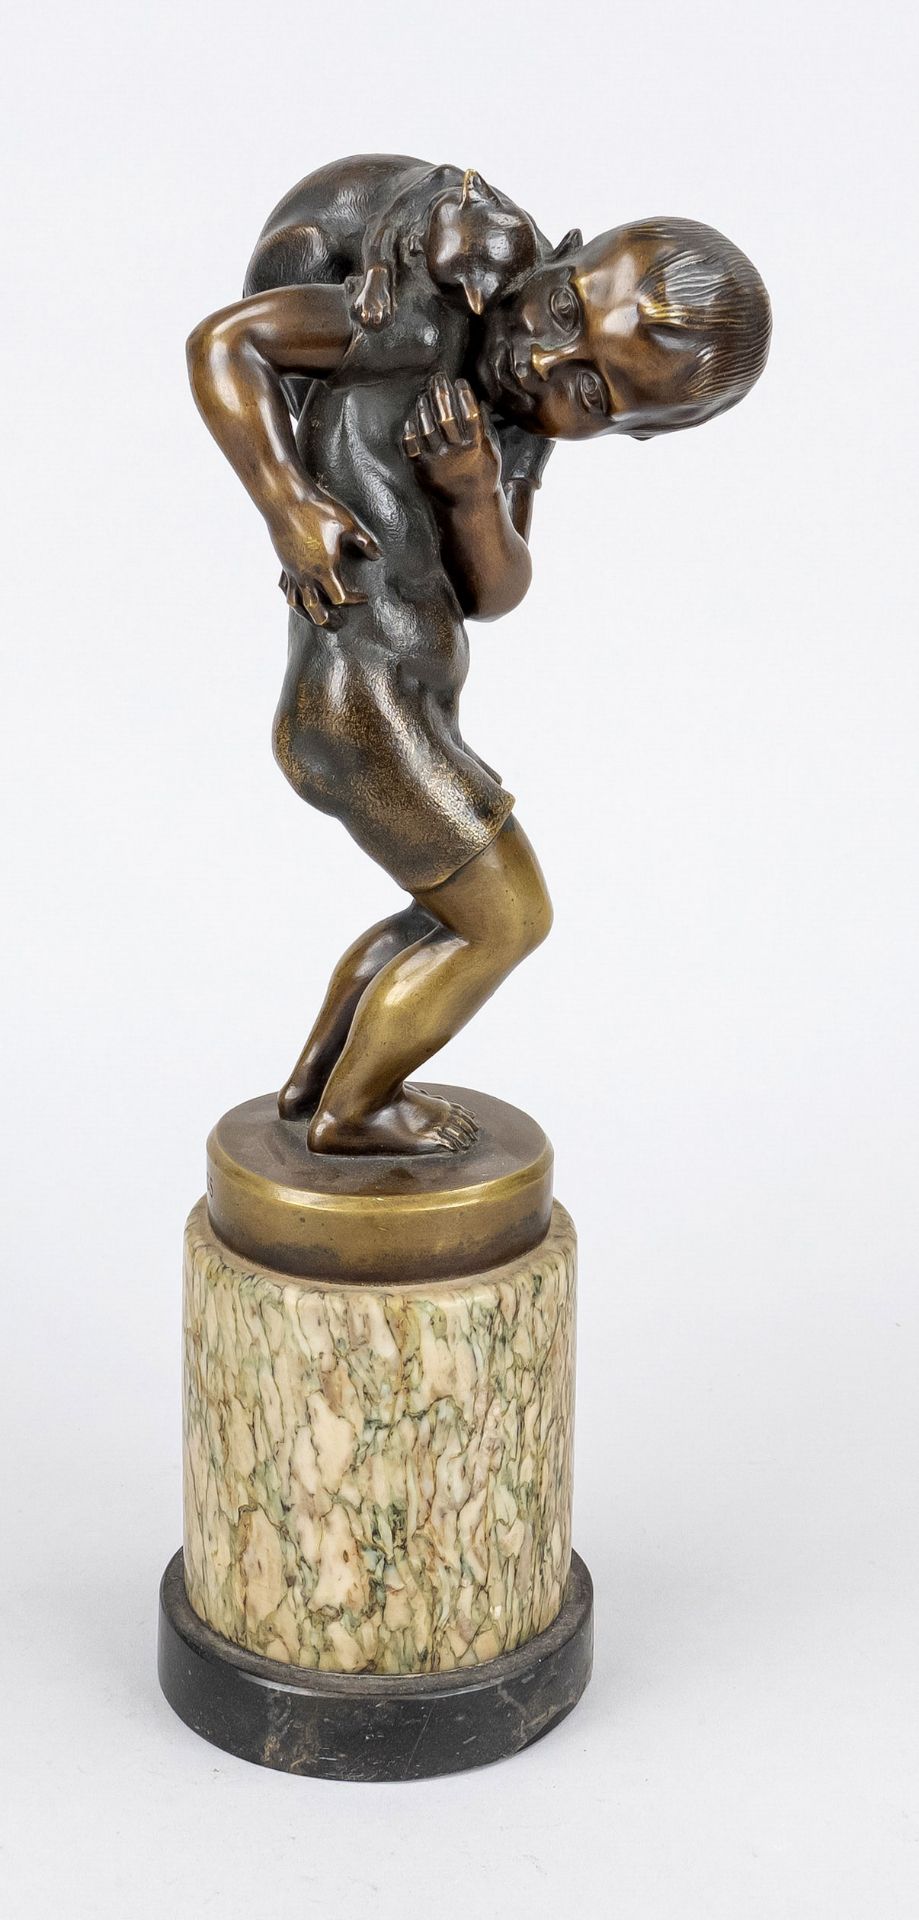 signed Stauss, German sculptor c. 1900, boy with cat on his back, patinated bronze on high marble